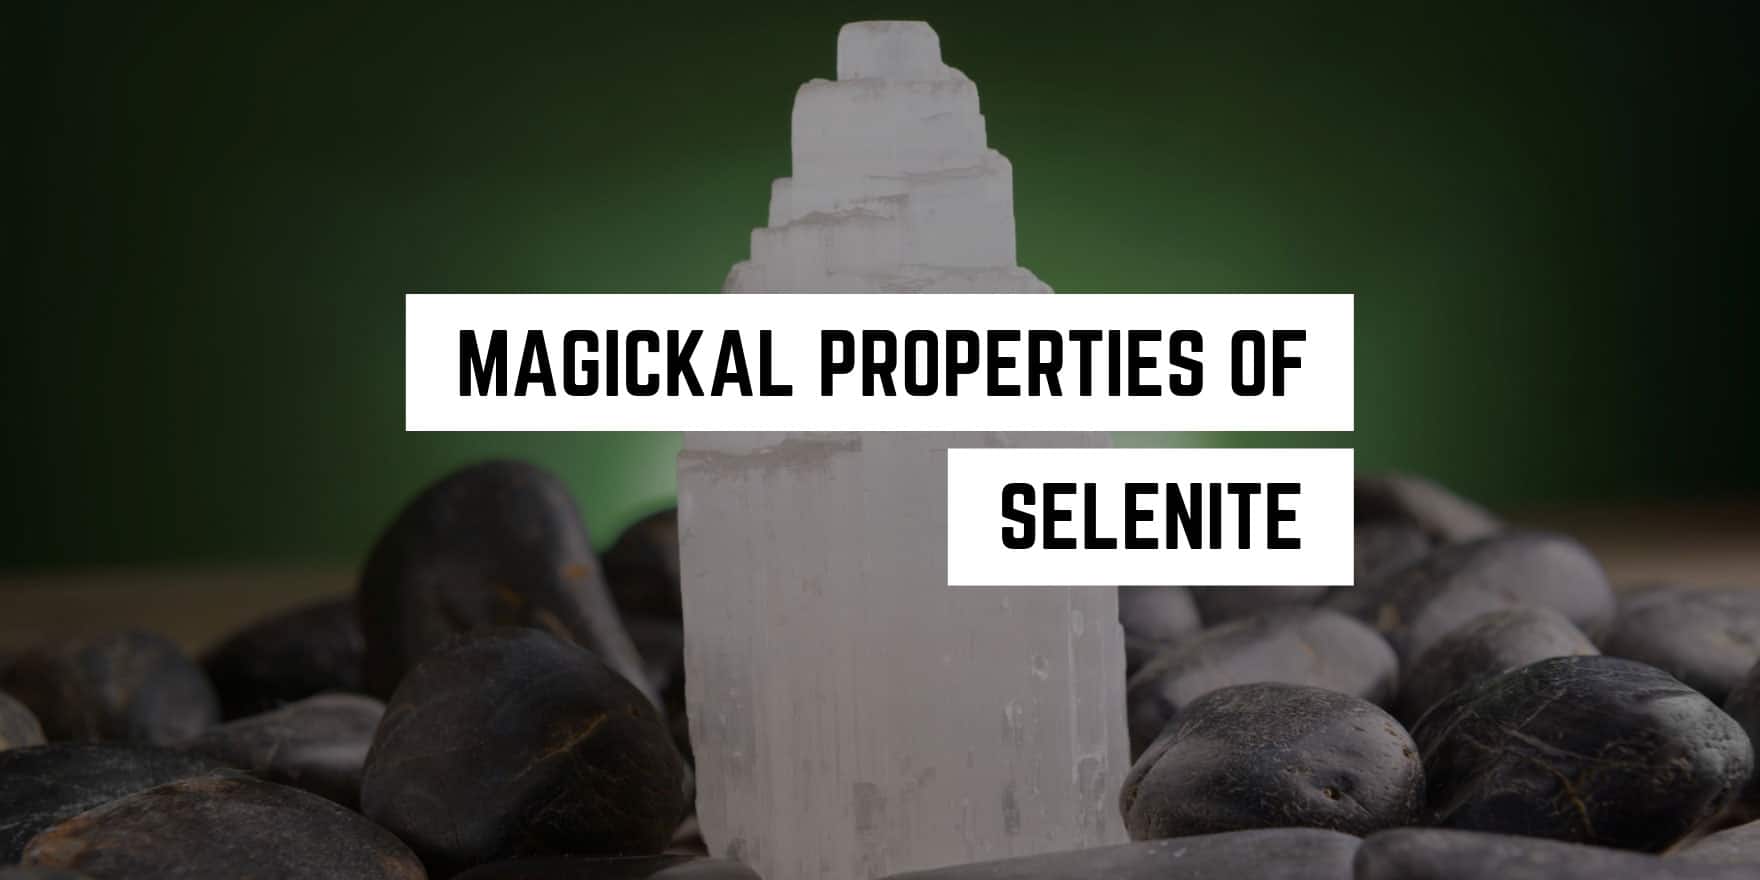 A selenite crystal tower stands amidst smooth pebbles, evoking a sense of tranquility and the mystical allure of new age product healing.